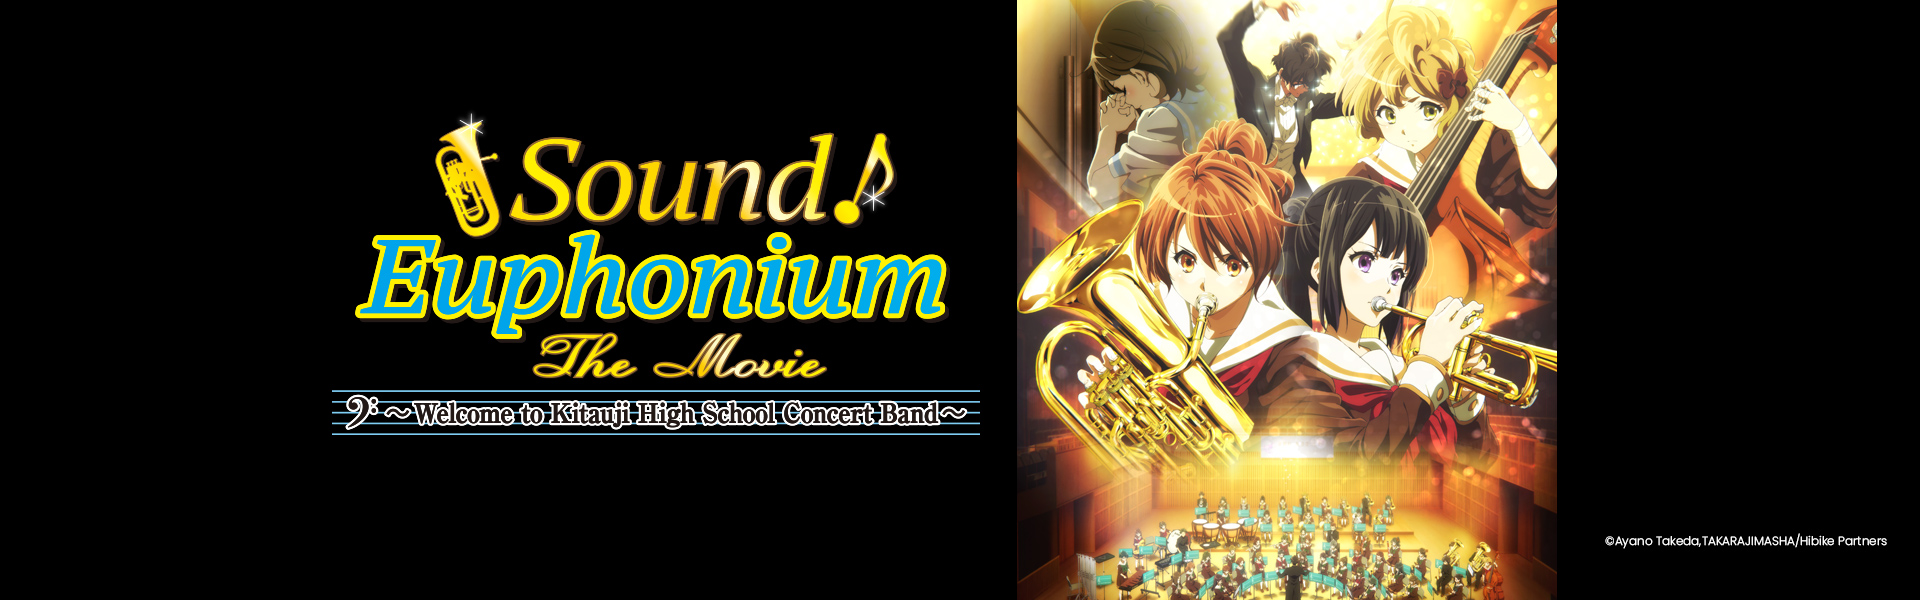 Sound! Euphonium, the Movie -Welcome to Kitauji High School Concert Band-